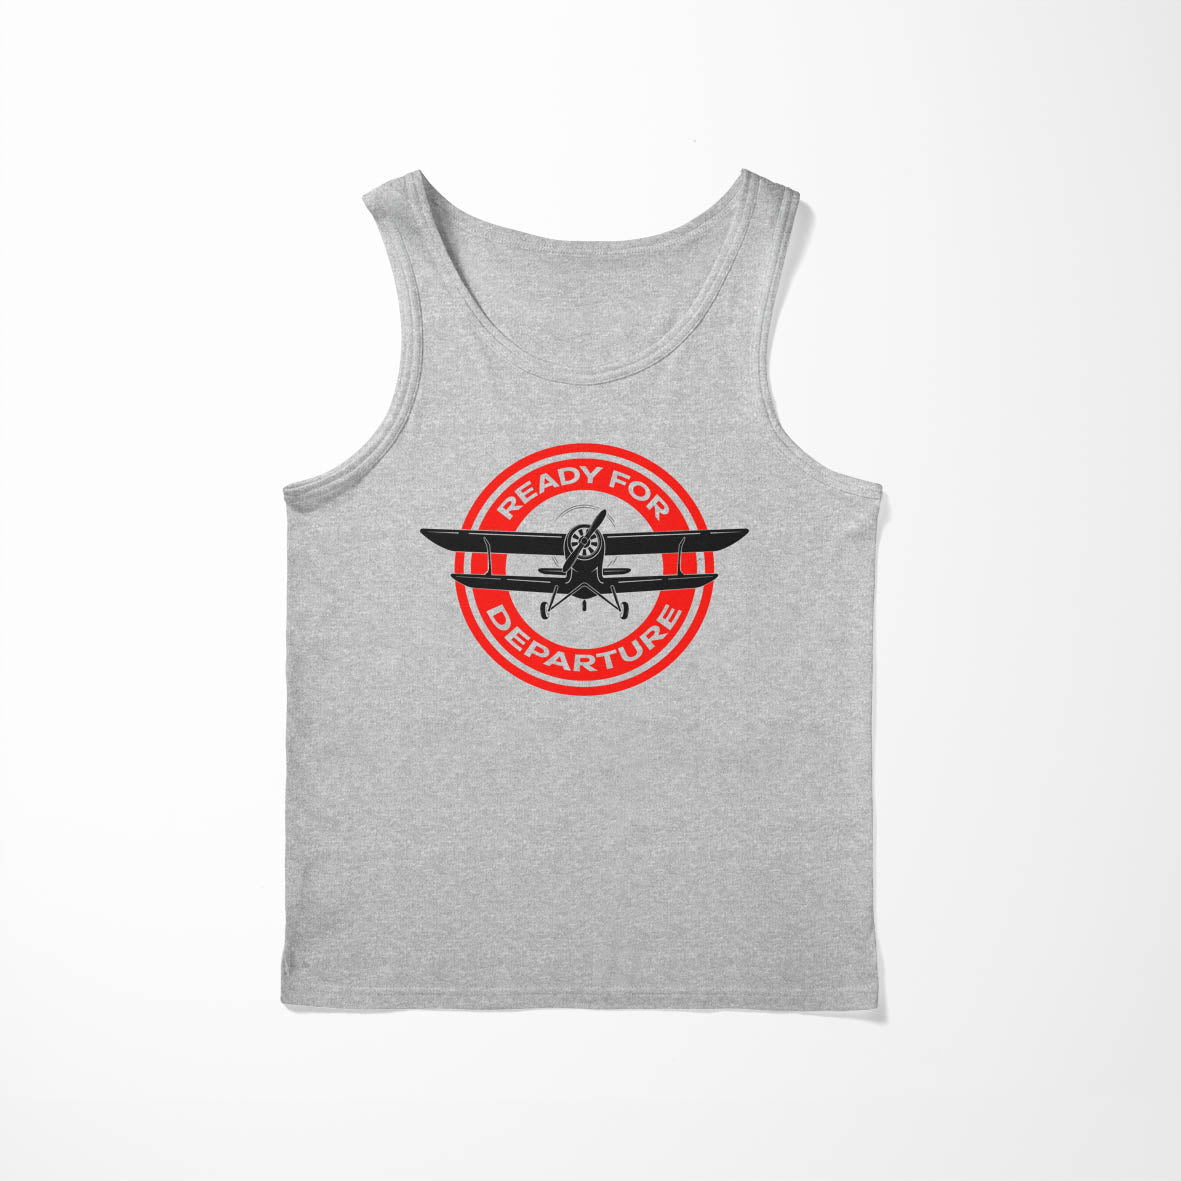 Ready for Departure Designed Tank Tops